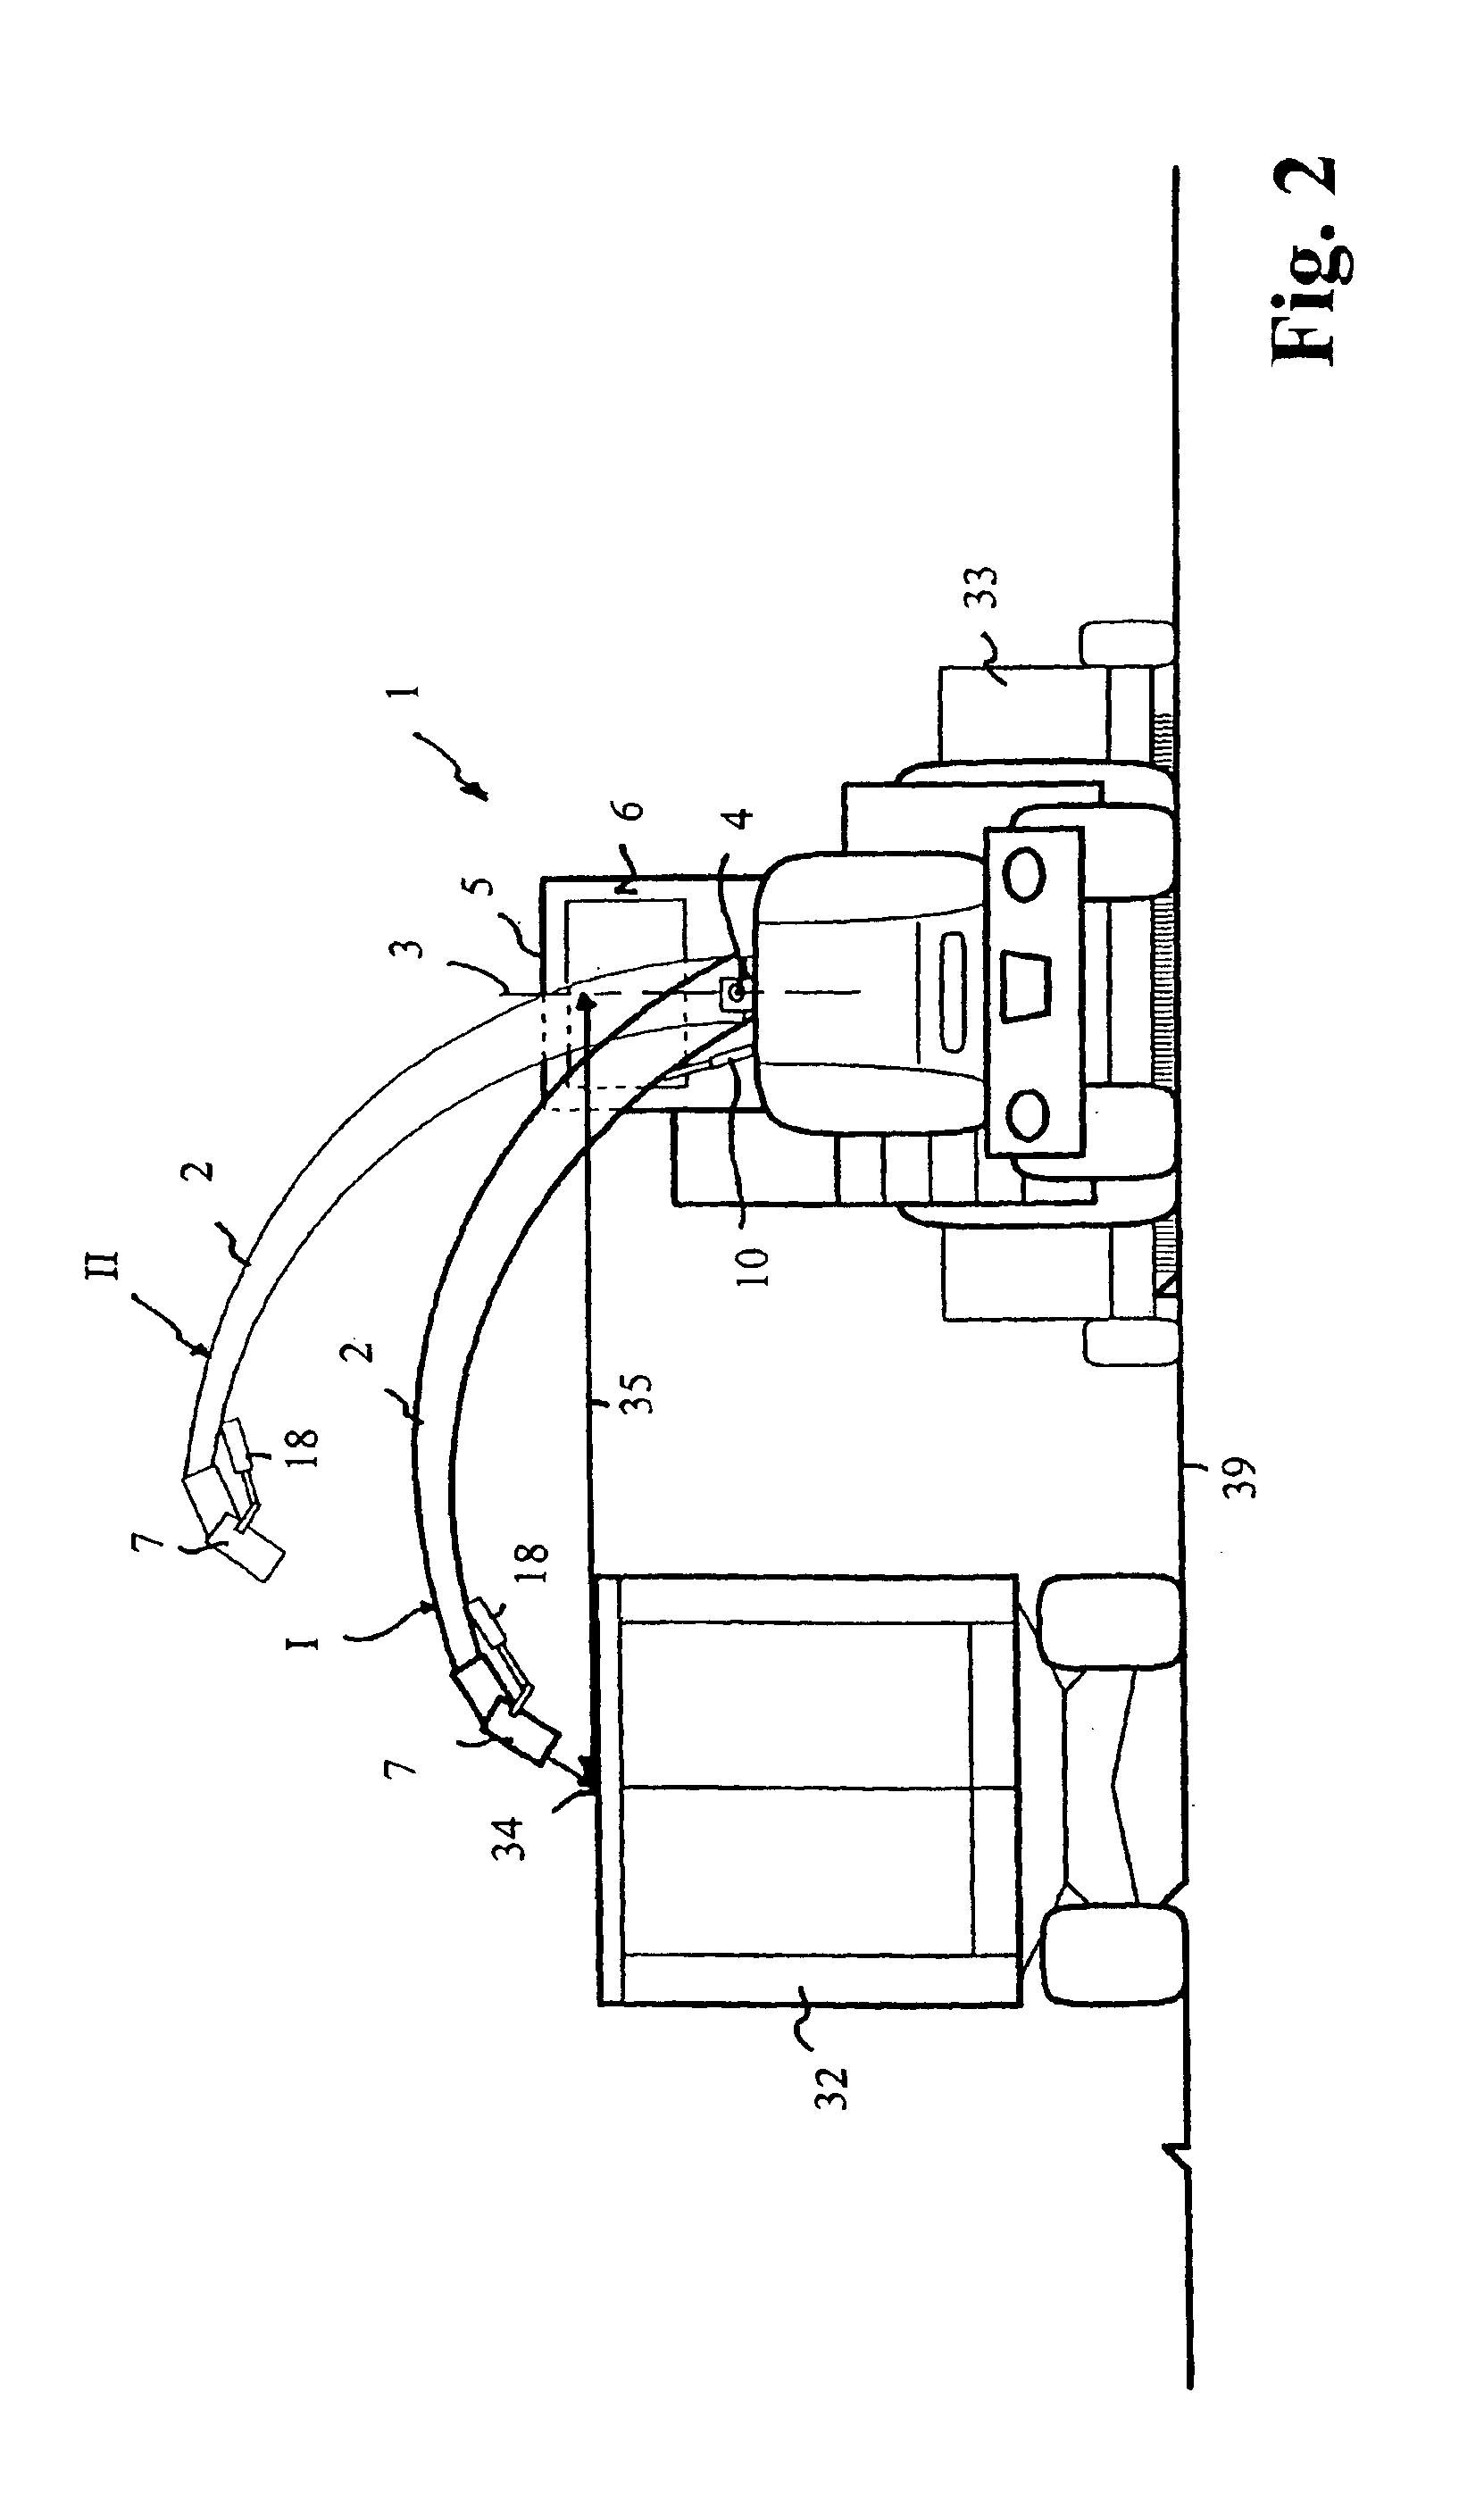 Device for controlling a forager chute